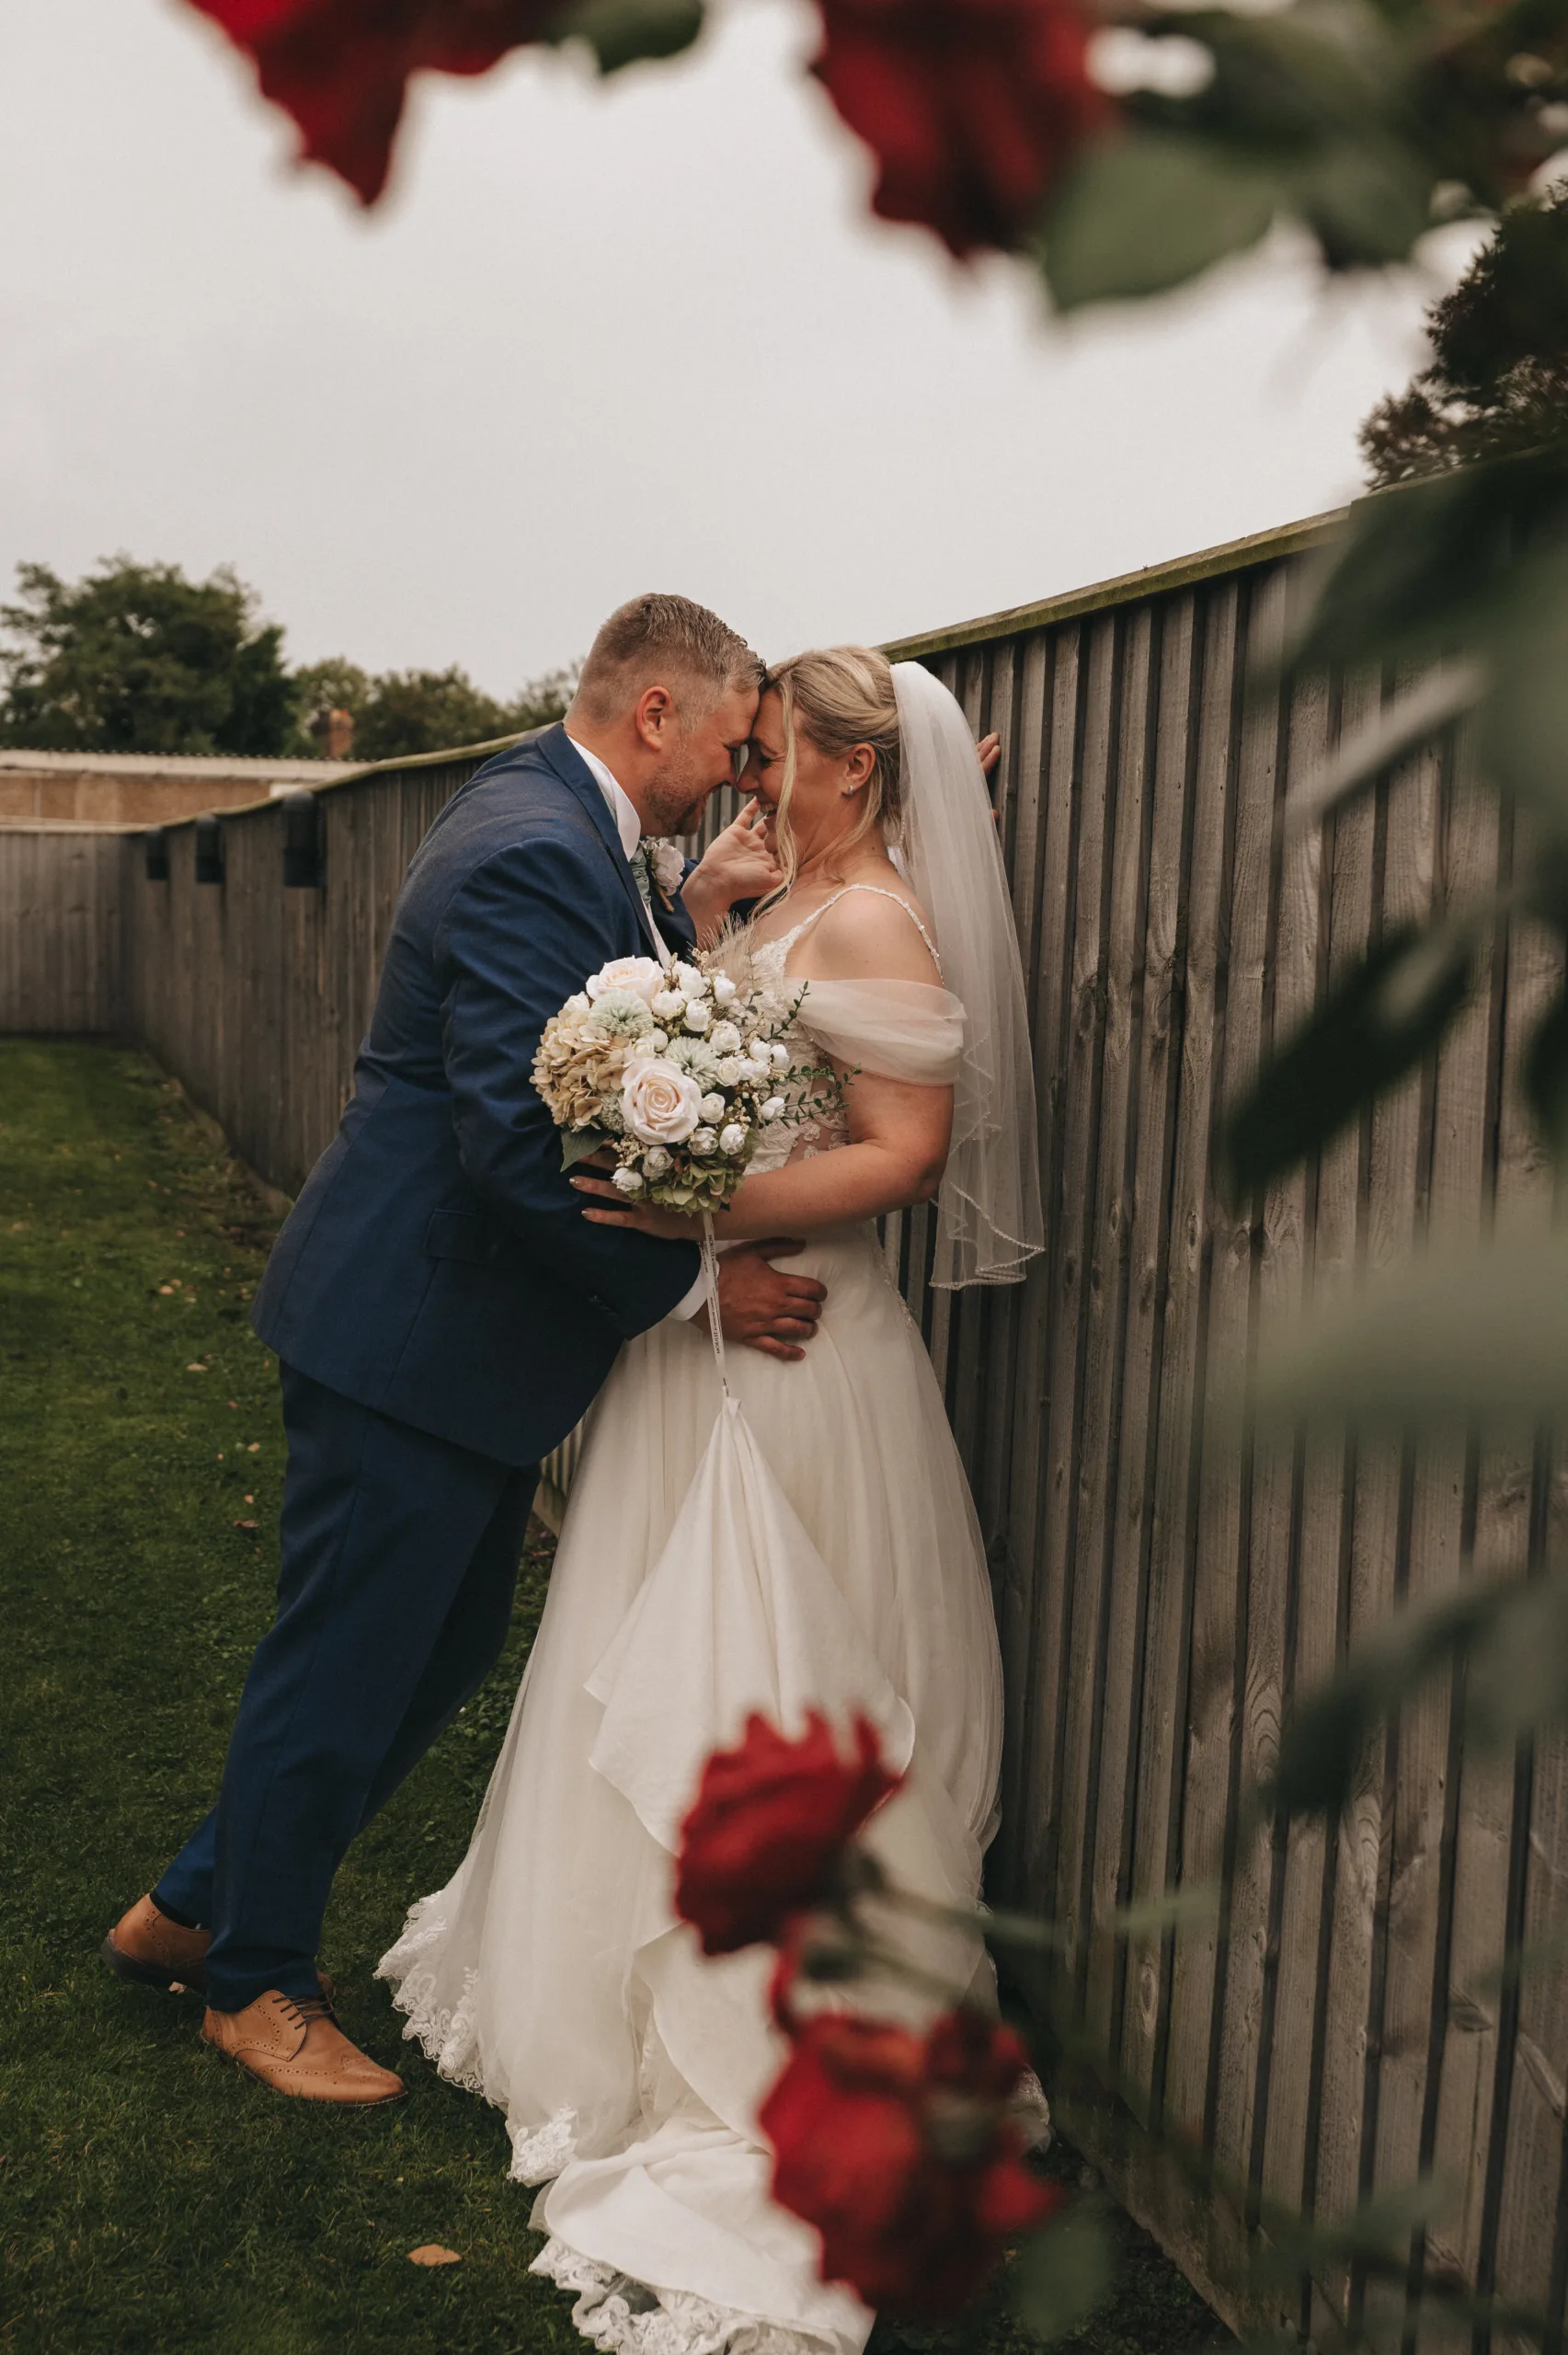 A bride and groom kissing in front of a fence with red roses, captured by a photographer.